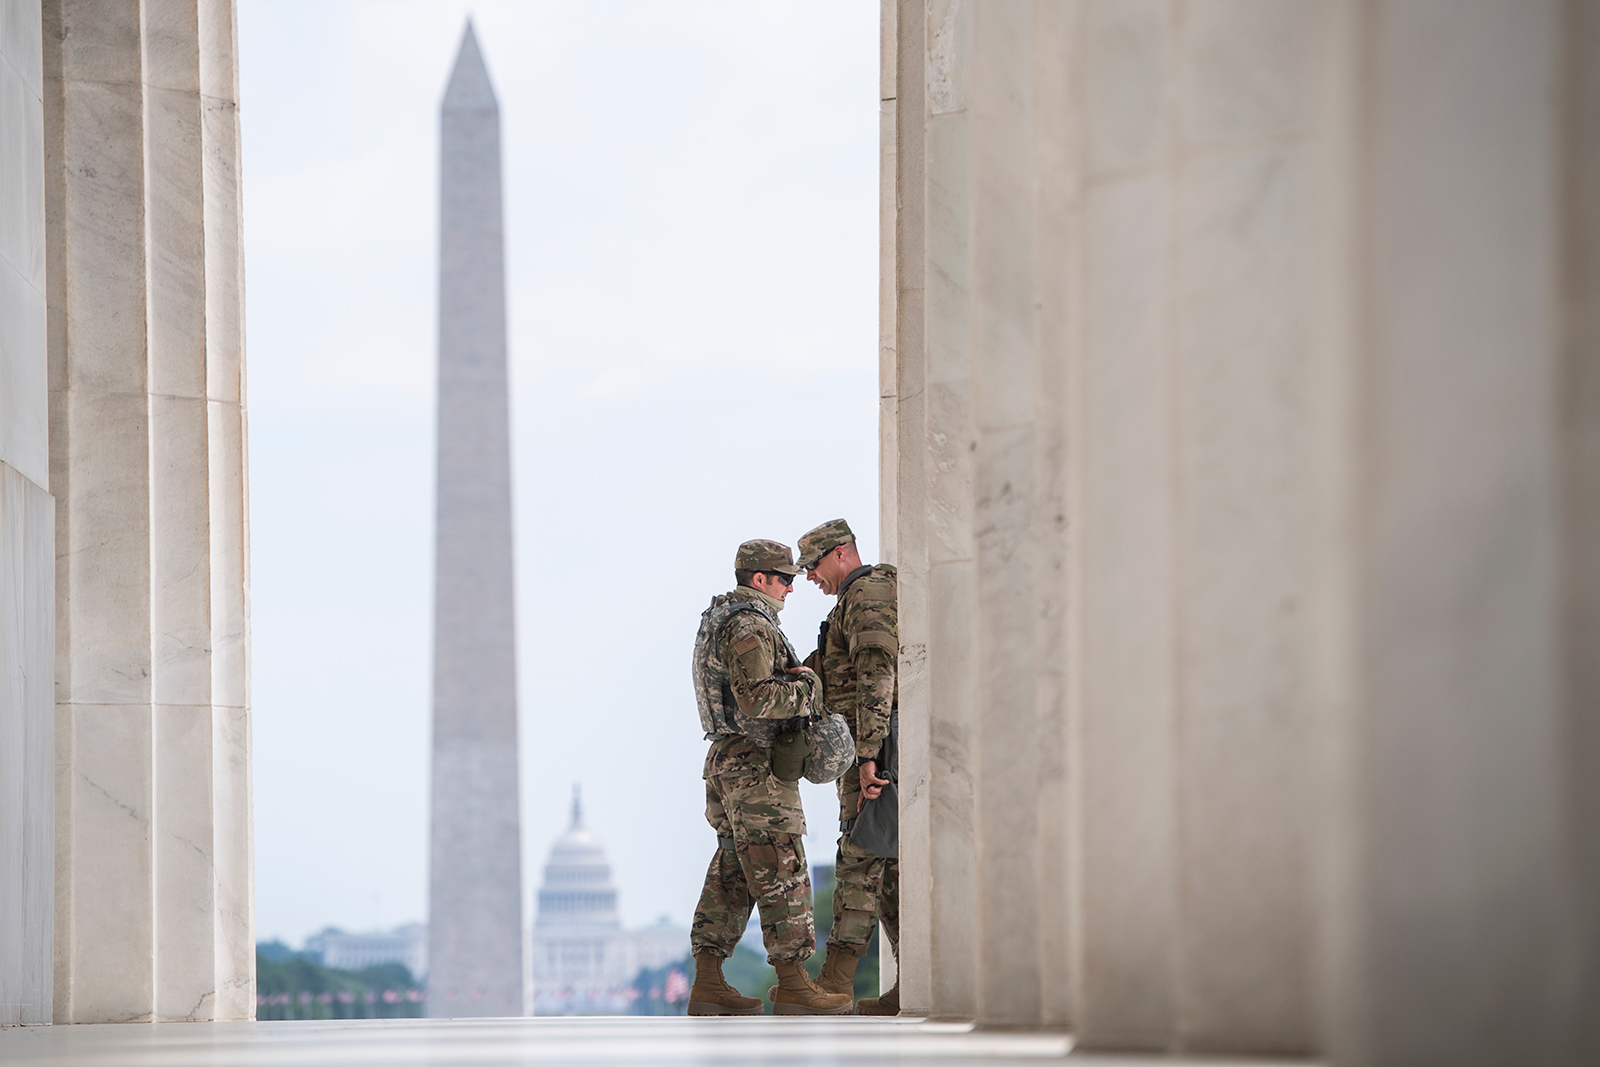 Members of the D.C. National Guard patrol the Lincoln Memorial in Washington, on June 3.